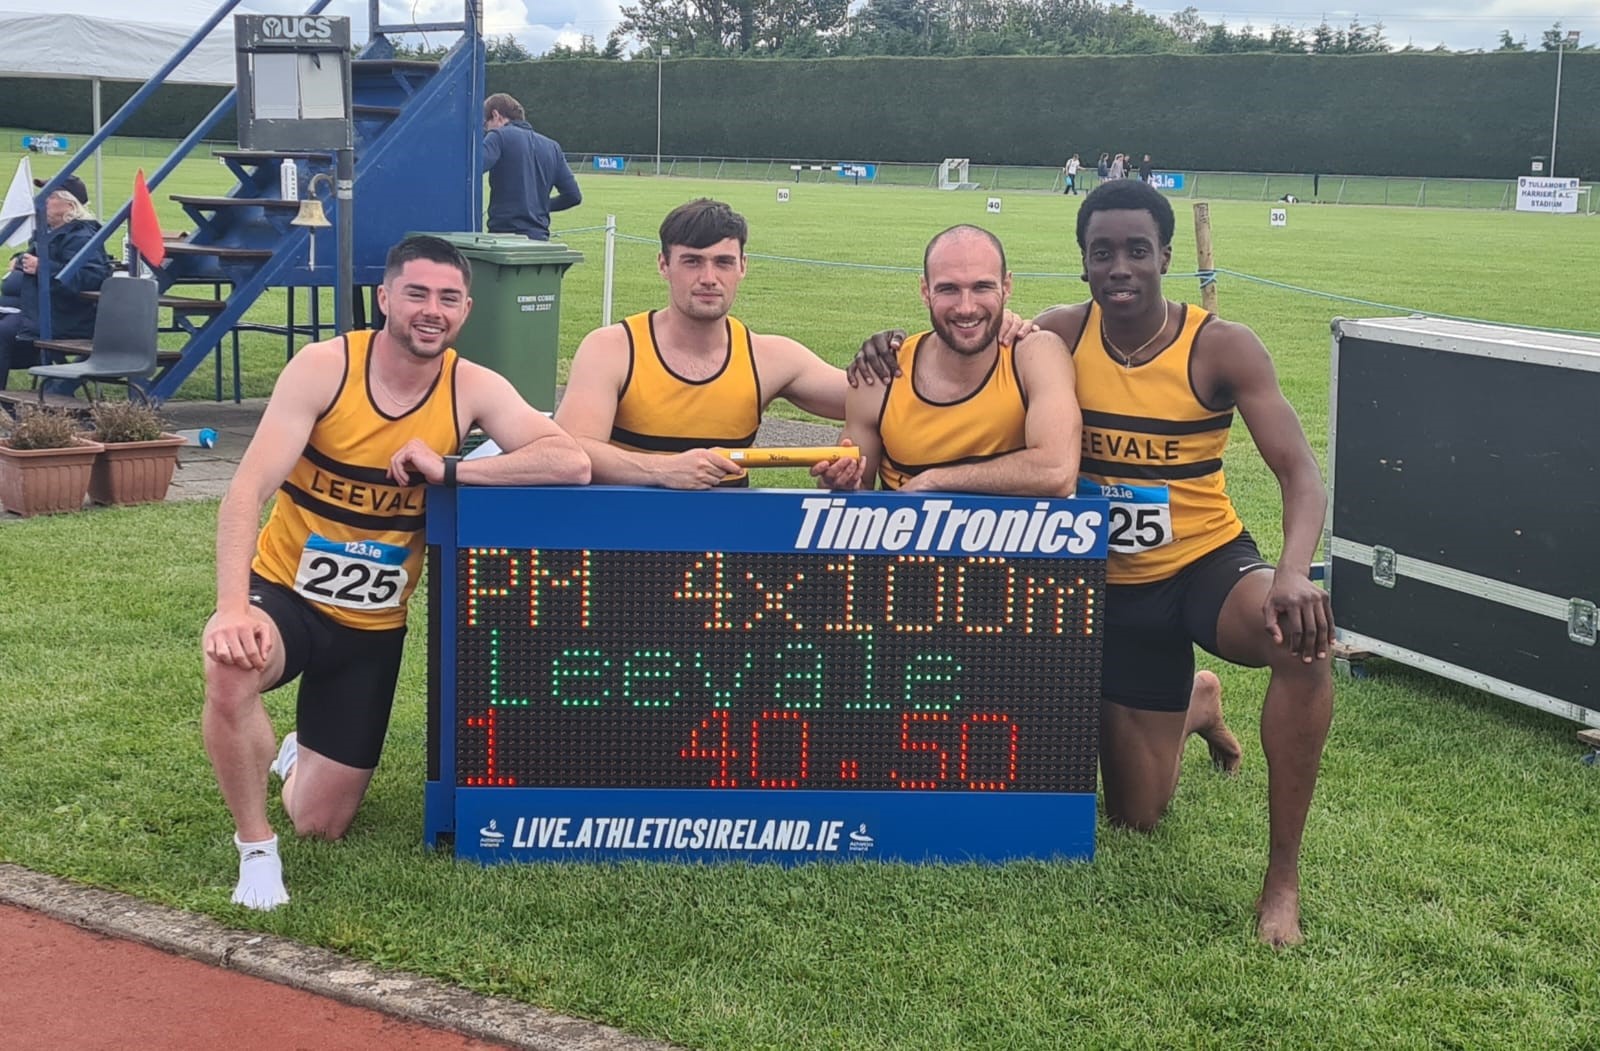 LEEVALE AND DSD CLAIM PREMIER TITLES AS NATIONAL CLUB RECORD FALLS